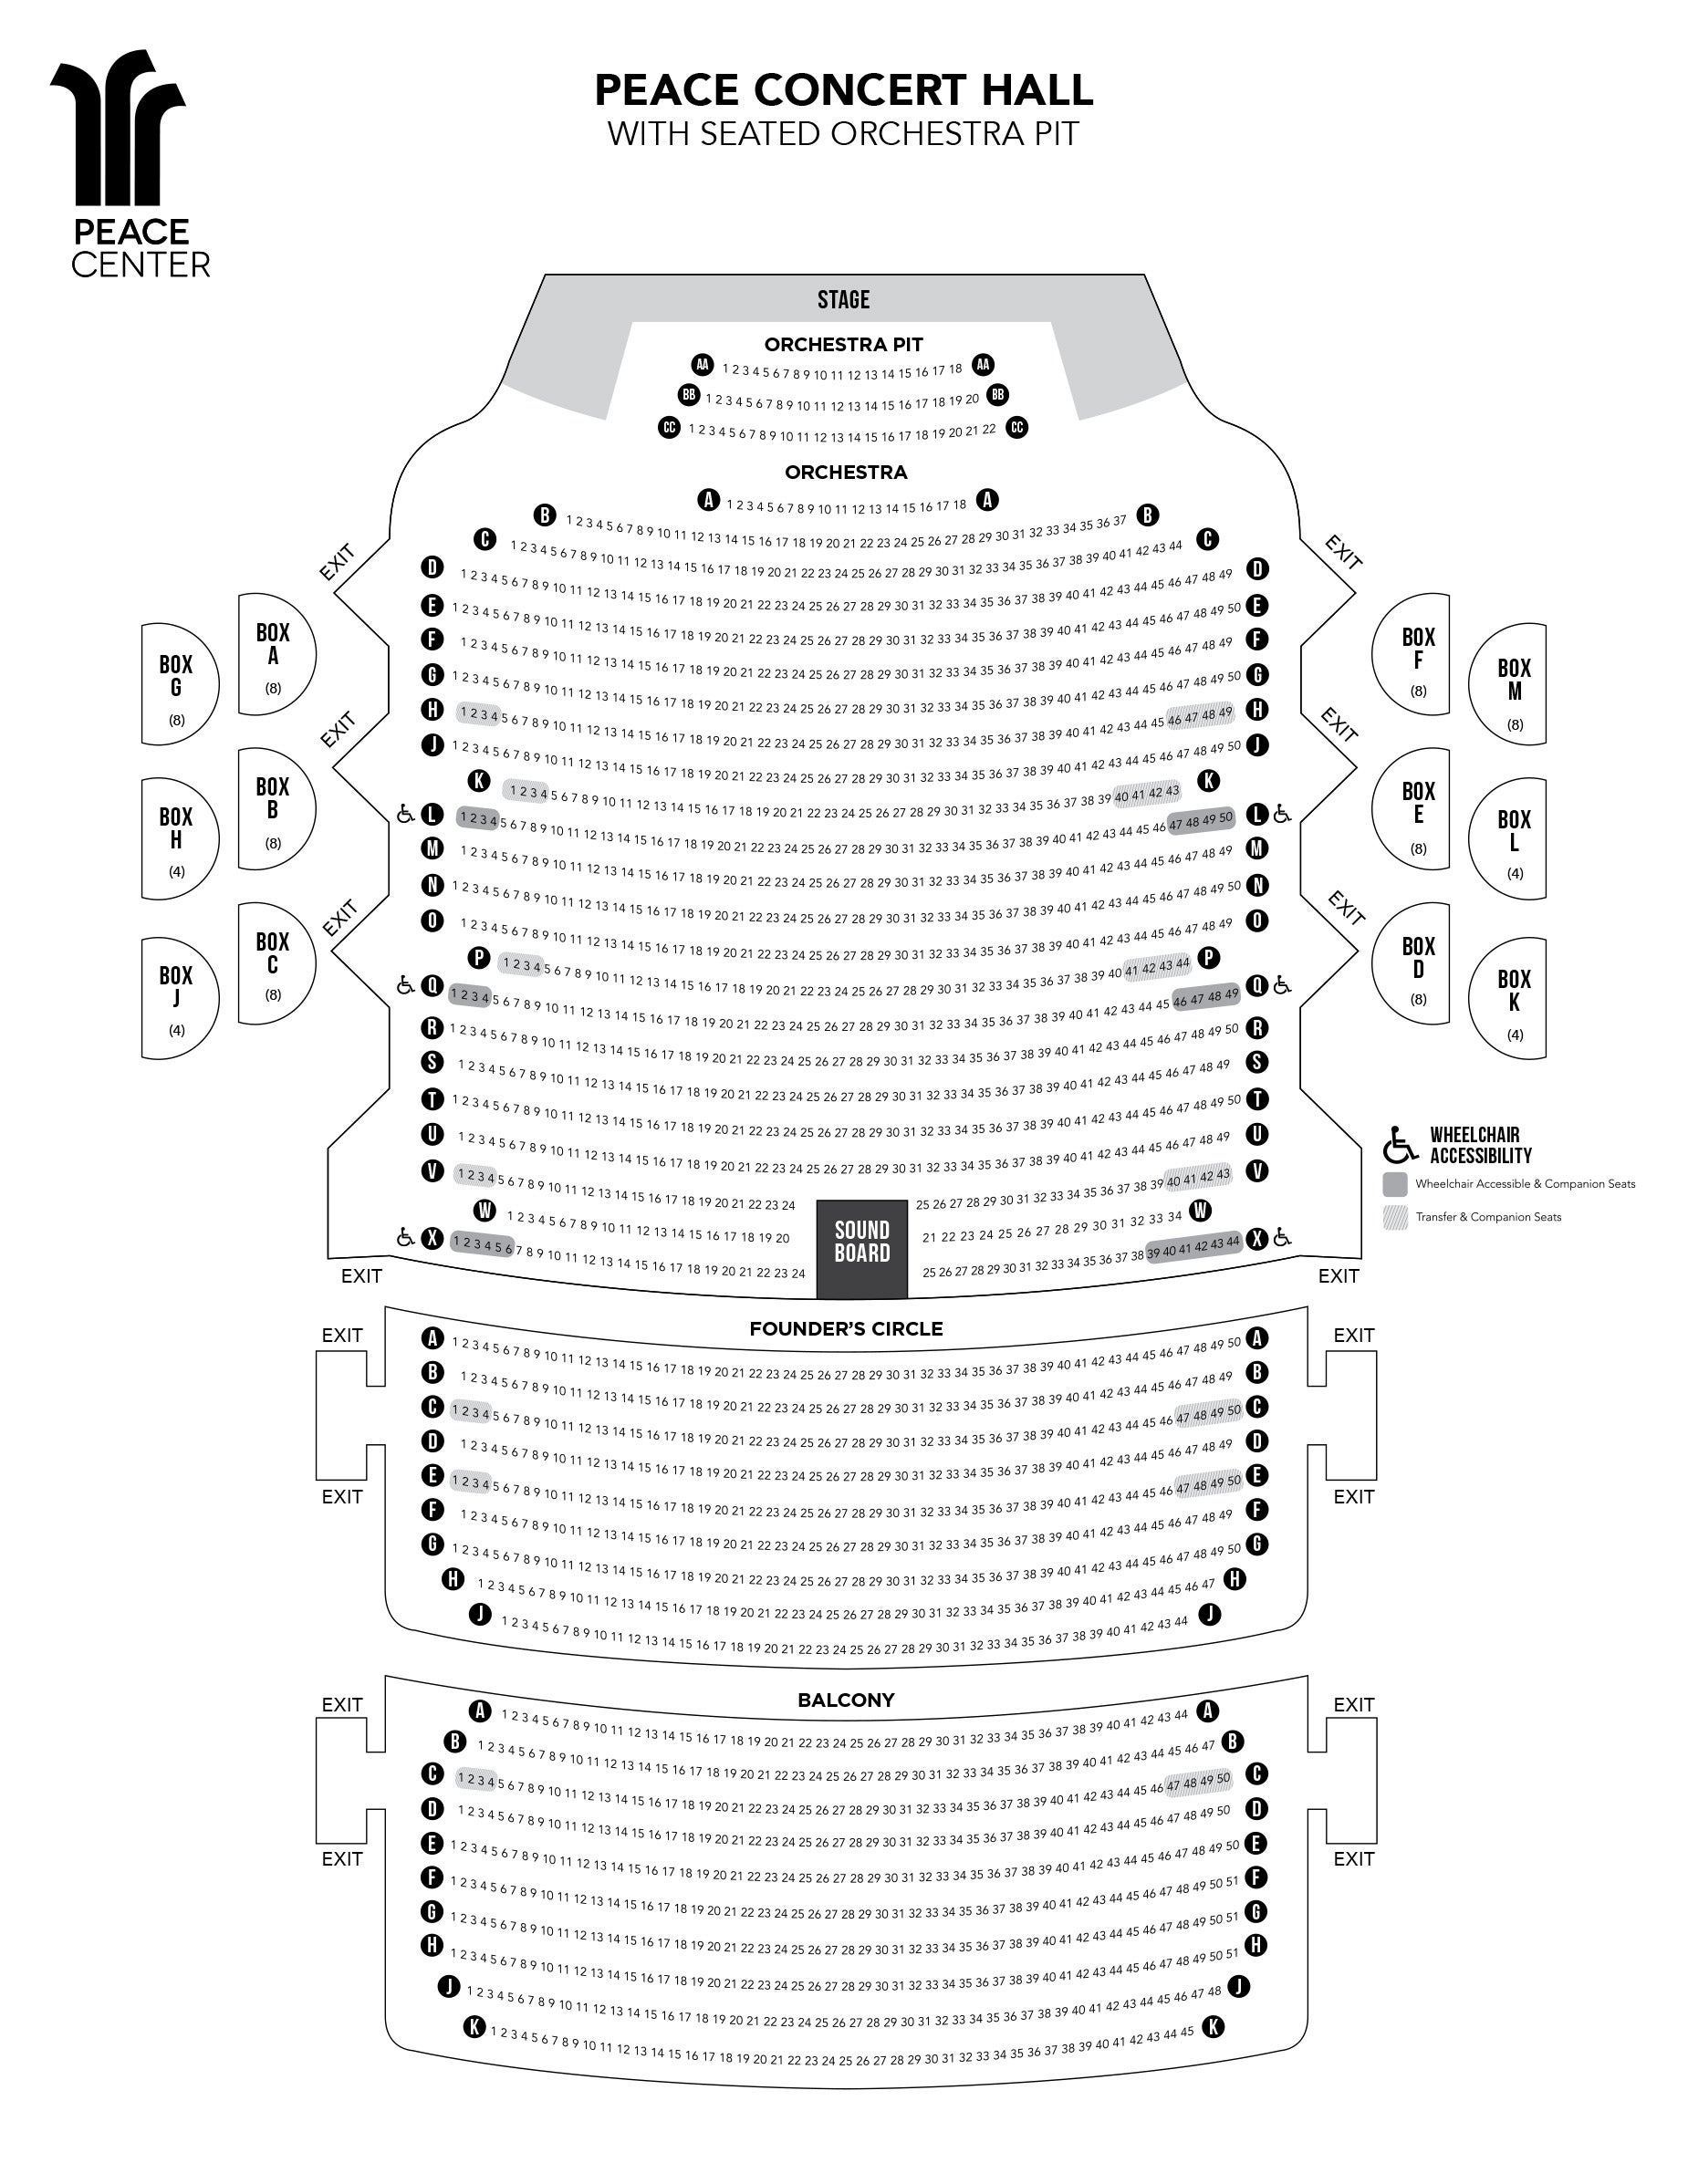 Bass Hall Seating Chart View